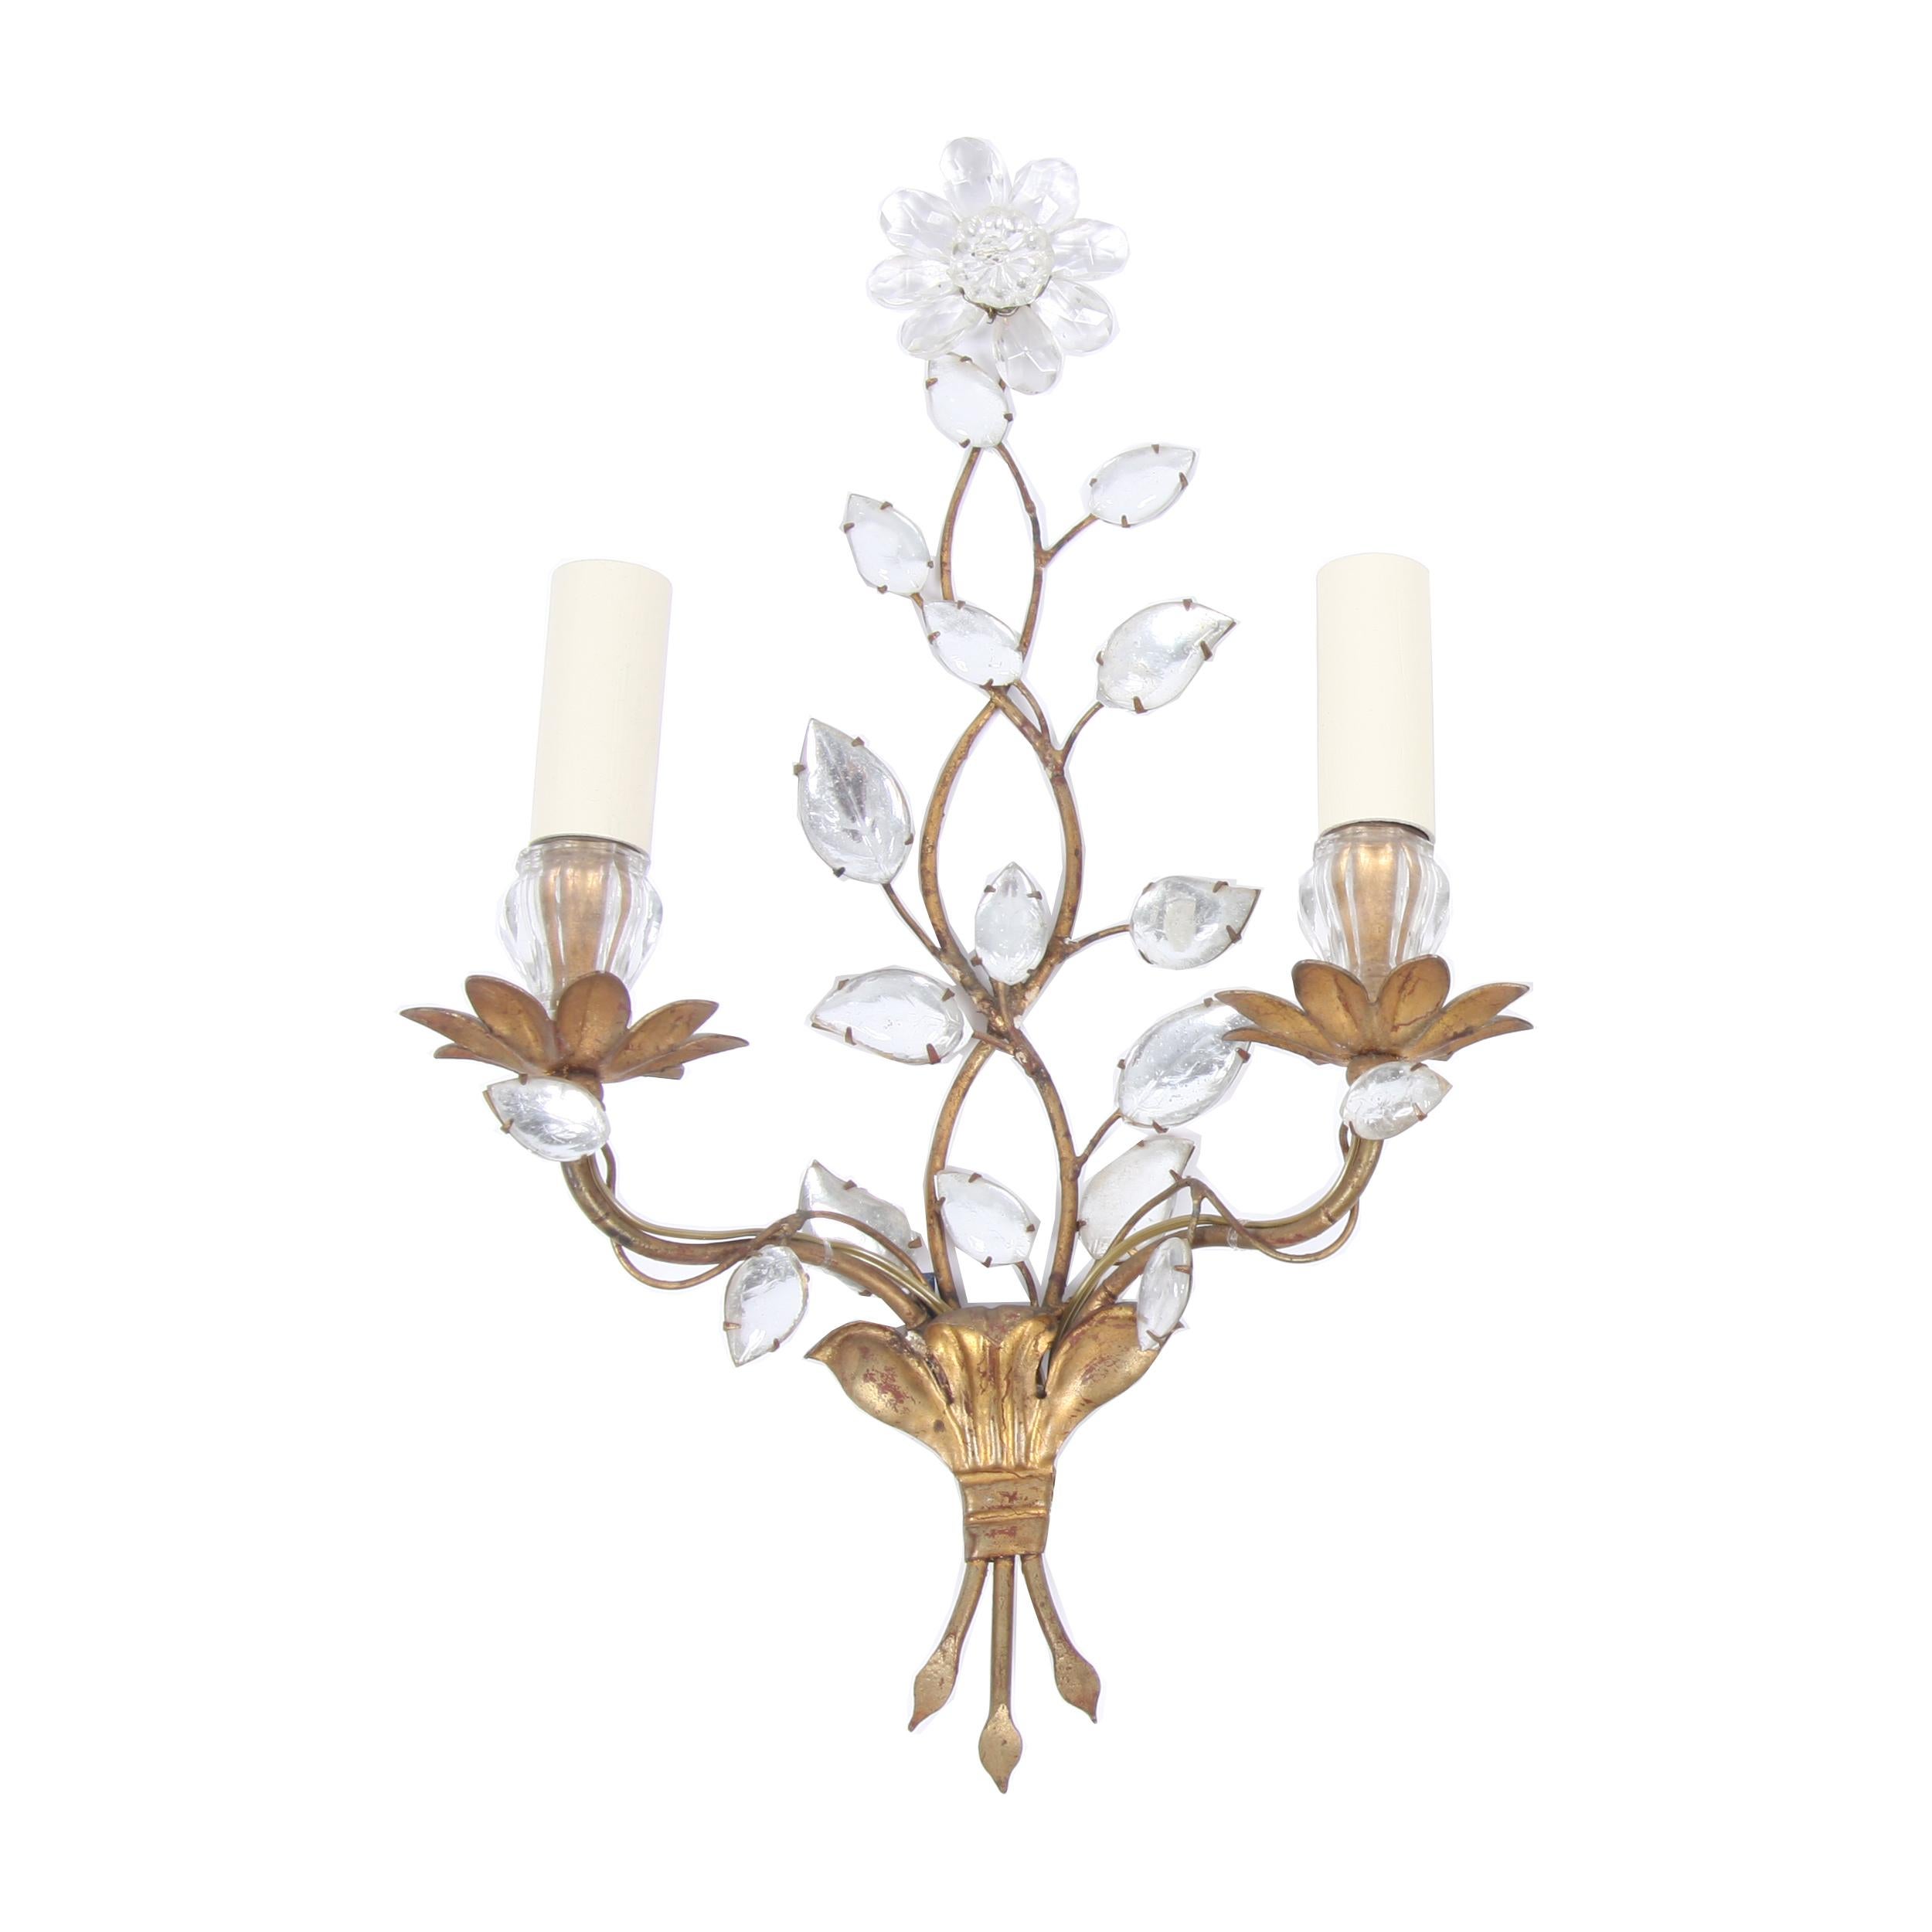 This is a lovely pair of wall sconces from Maison Baguès. Made from gilt metal and glass, with a flower design.

Made in France in the 1950s. Gorgeous!

Since the 1860s, the renowned French luxury lighting atelier Maison Baguès has been